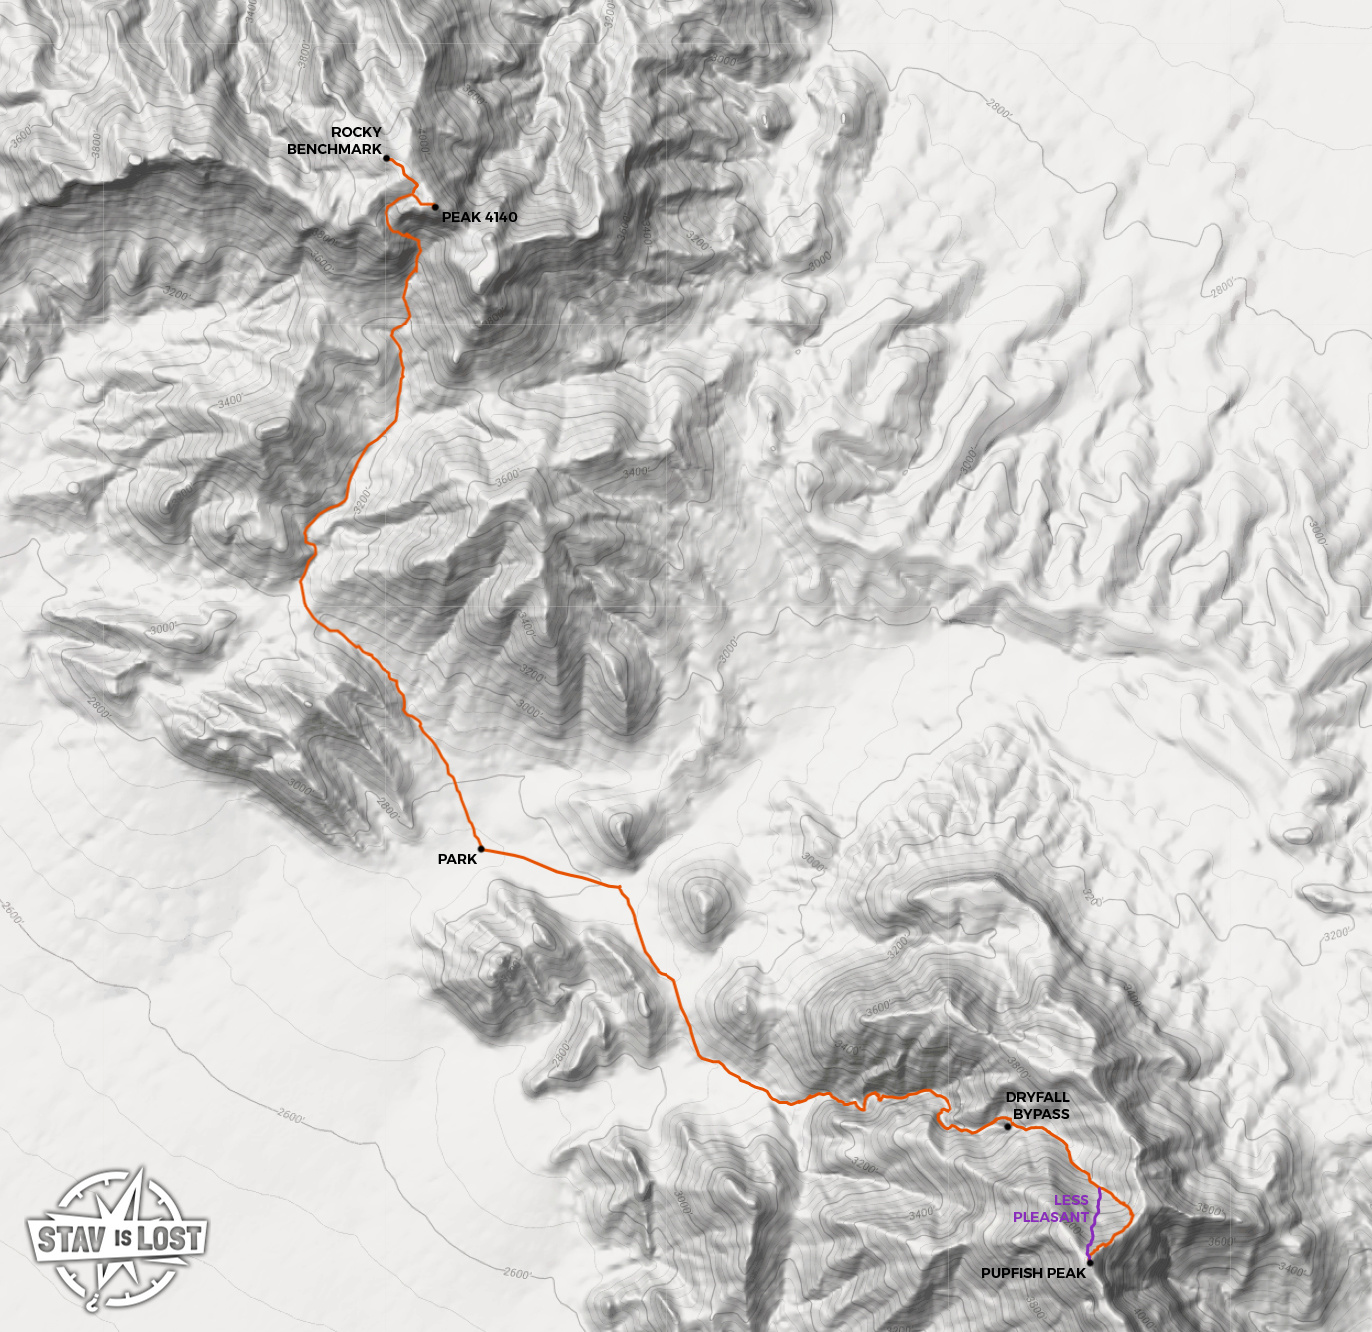 map for Rocky Benchmark and Pupfish Peak by stav is lost